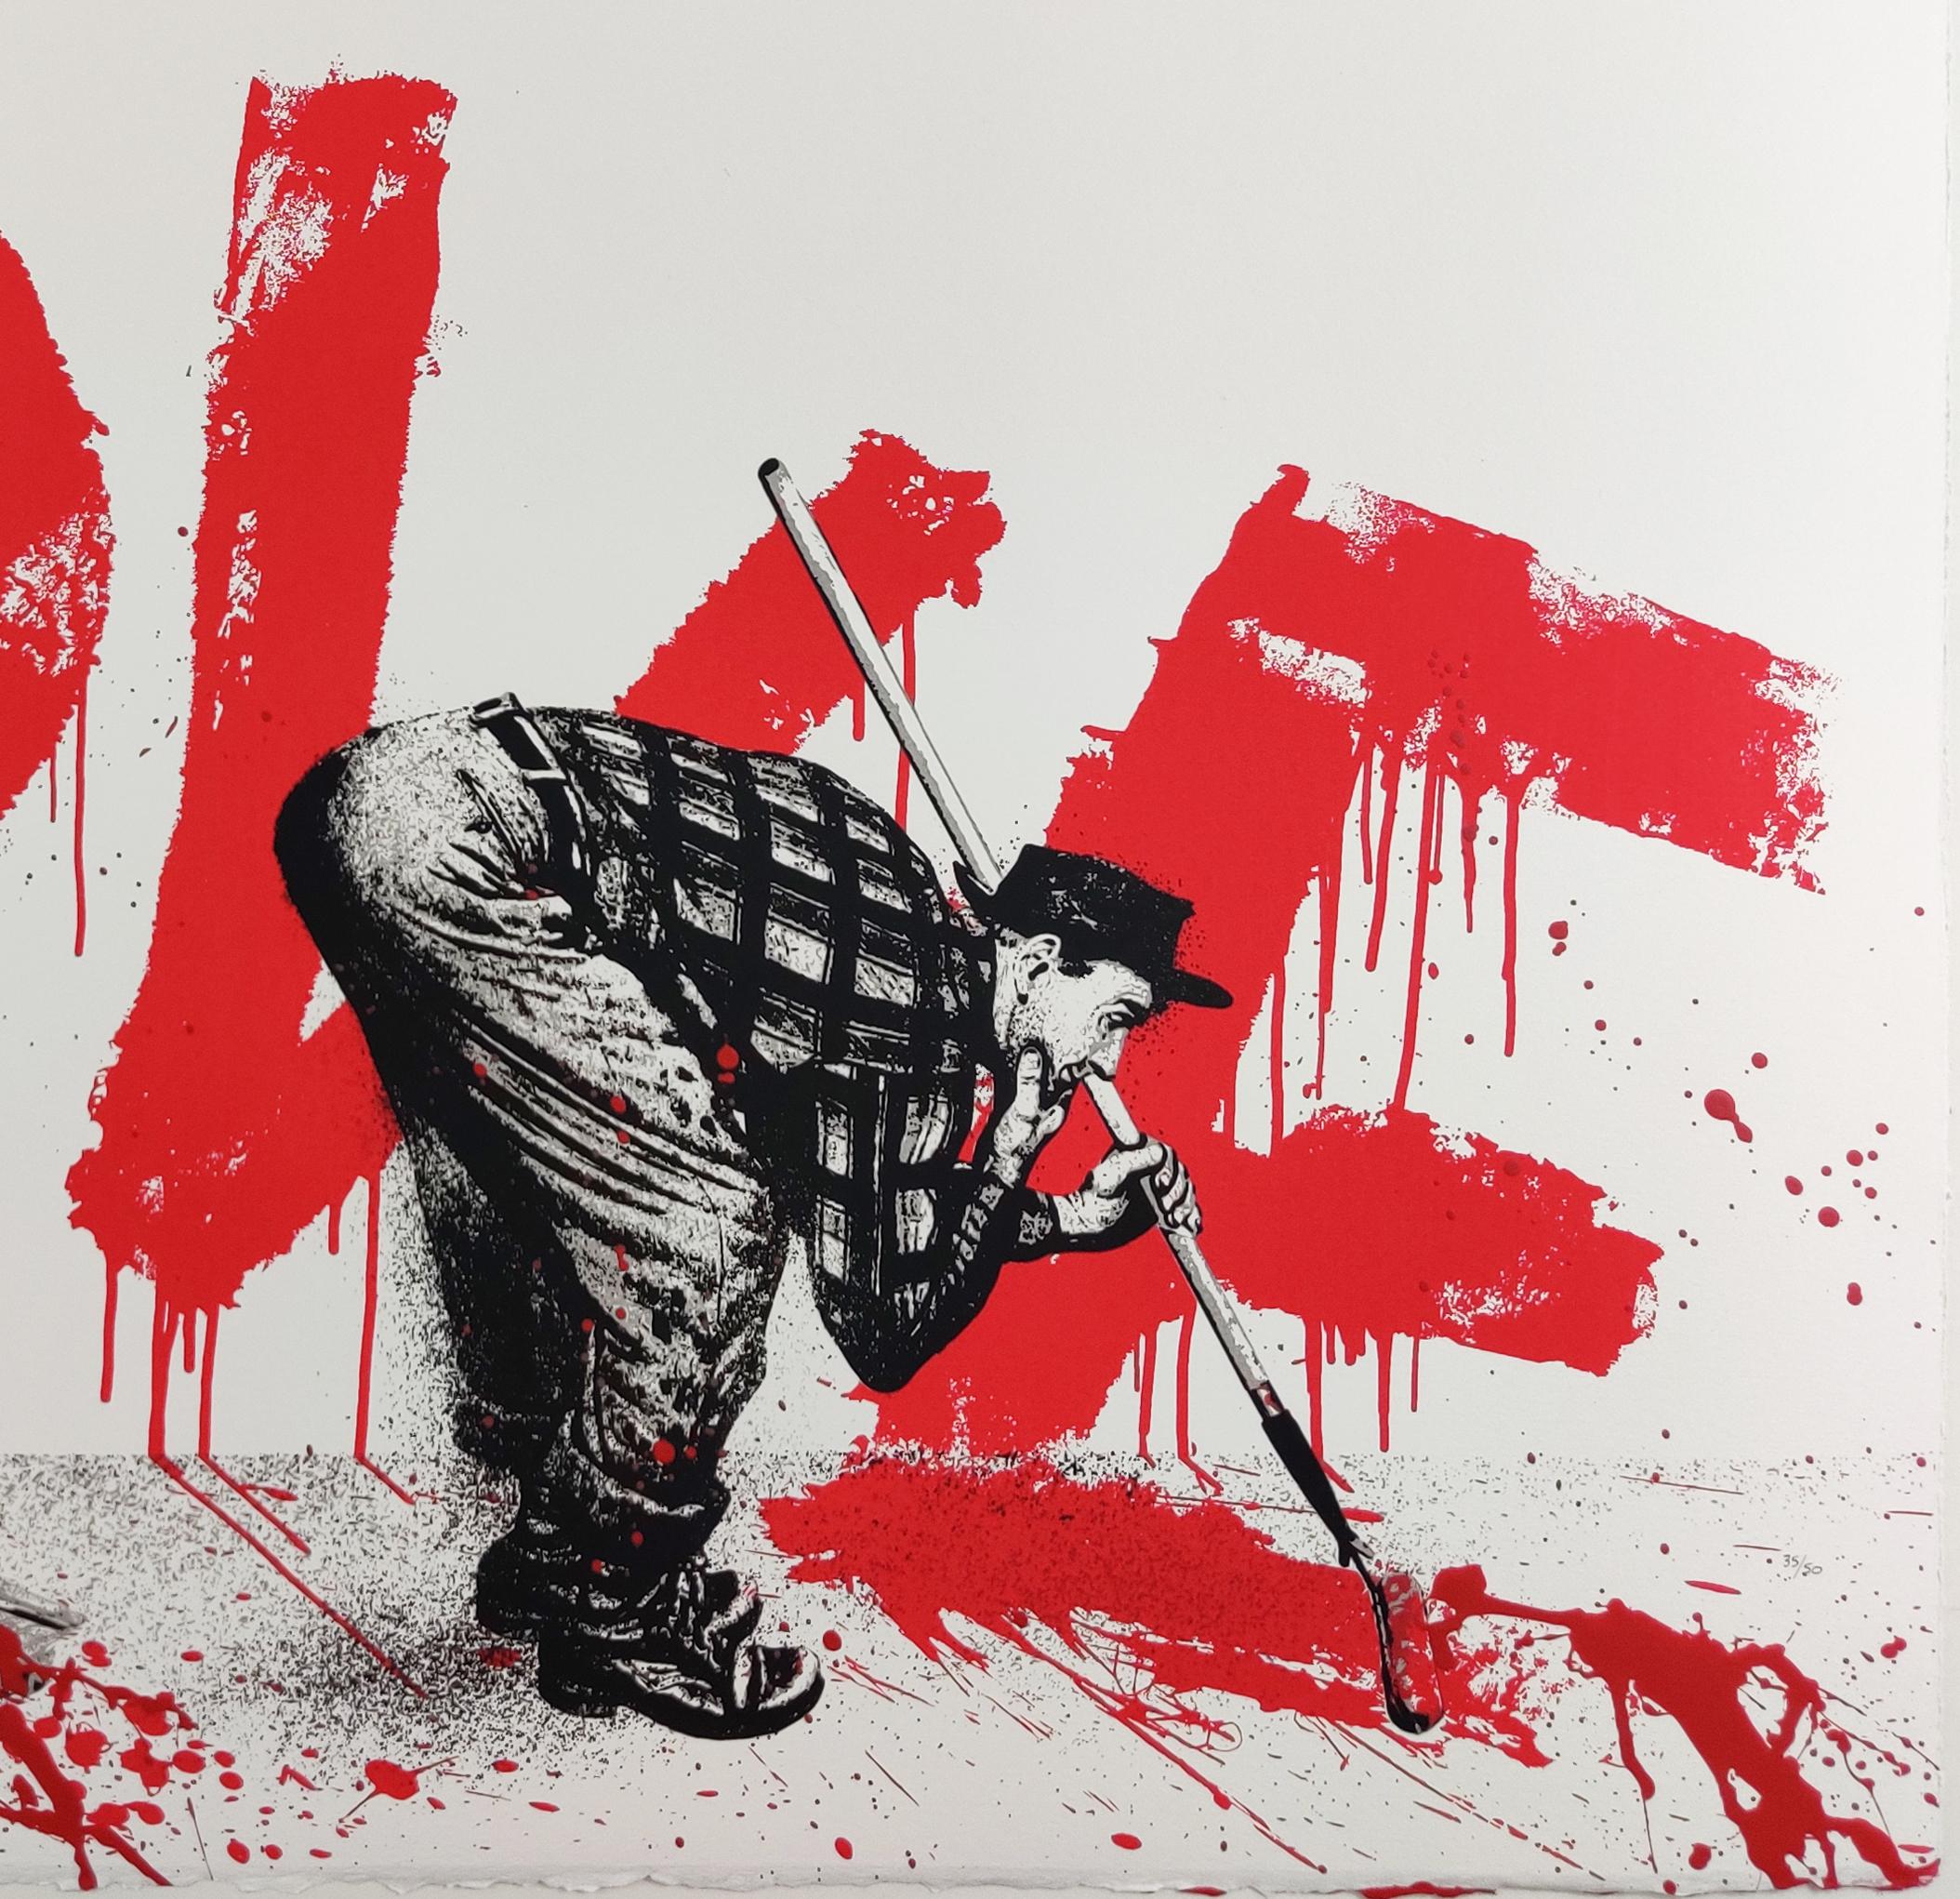 All You Need Is, (Love) by Mr. Brainwash. Contemporary art print from an edition of 50. Screenprint with hand painting on hand torn archival paper making each piece unique. Dimensions of 22.5 in x 30 in released in 2018.   Vibrant red on white which